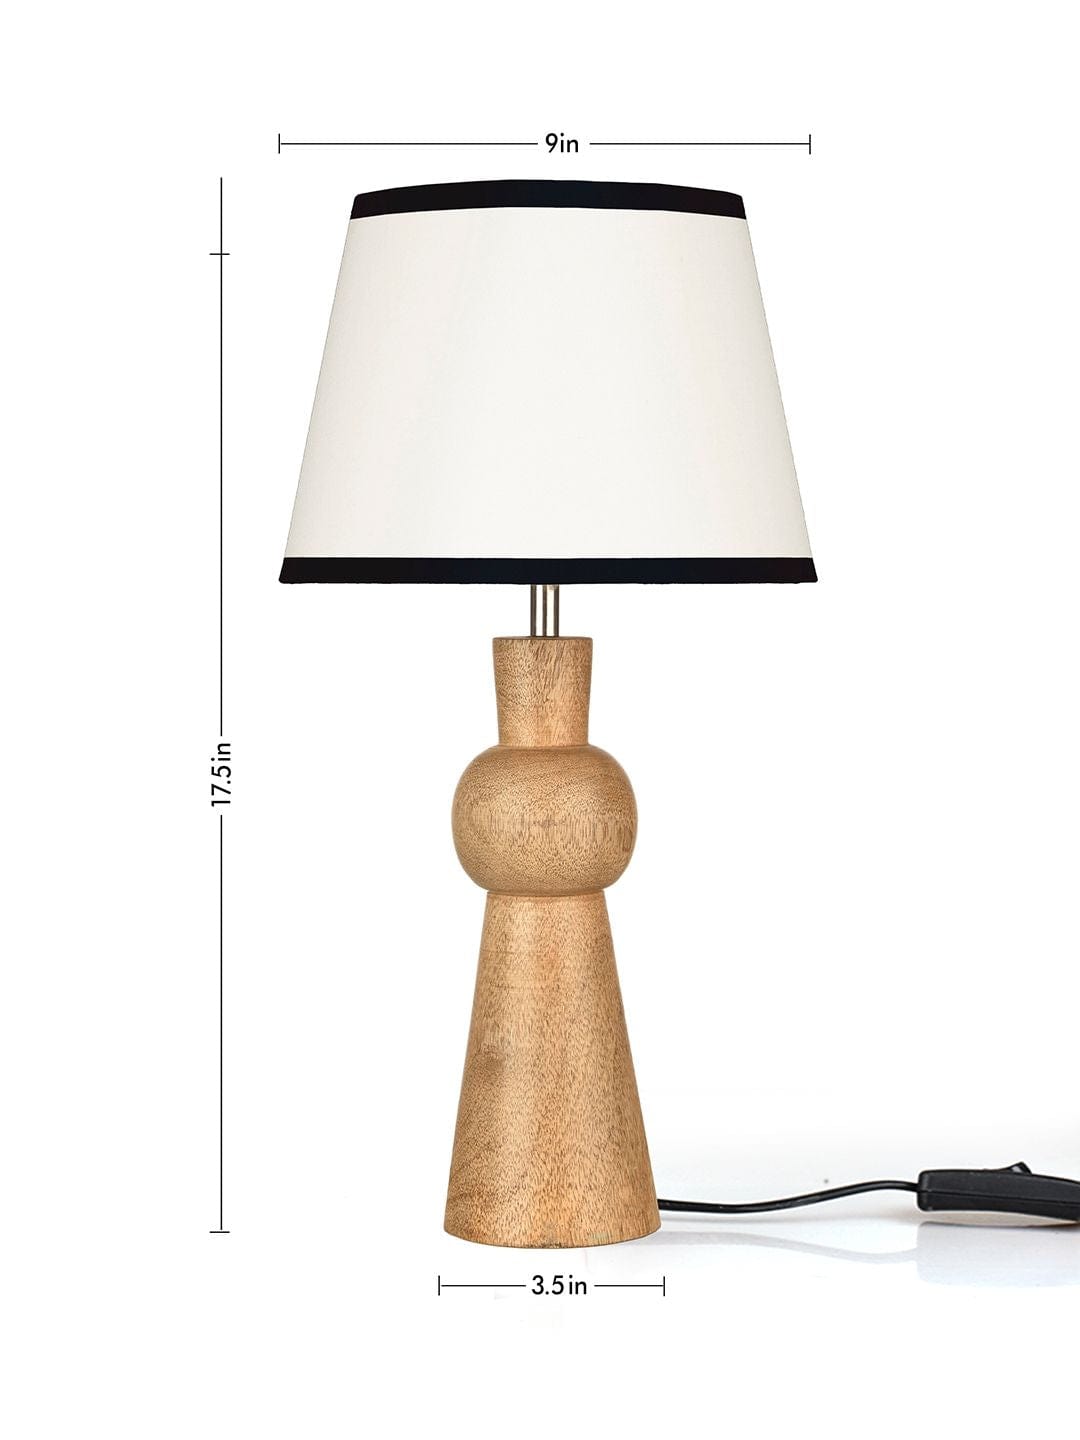 Wooden Skirt Lamp with White Cotton Shade